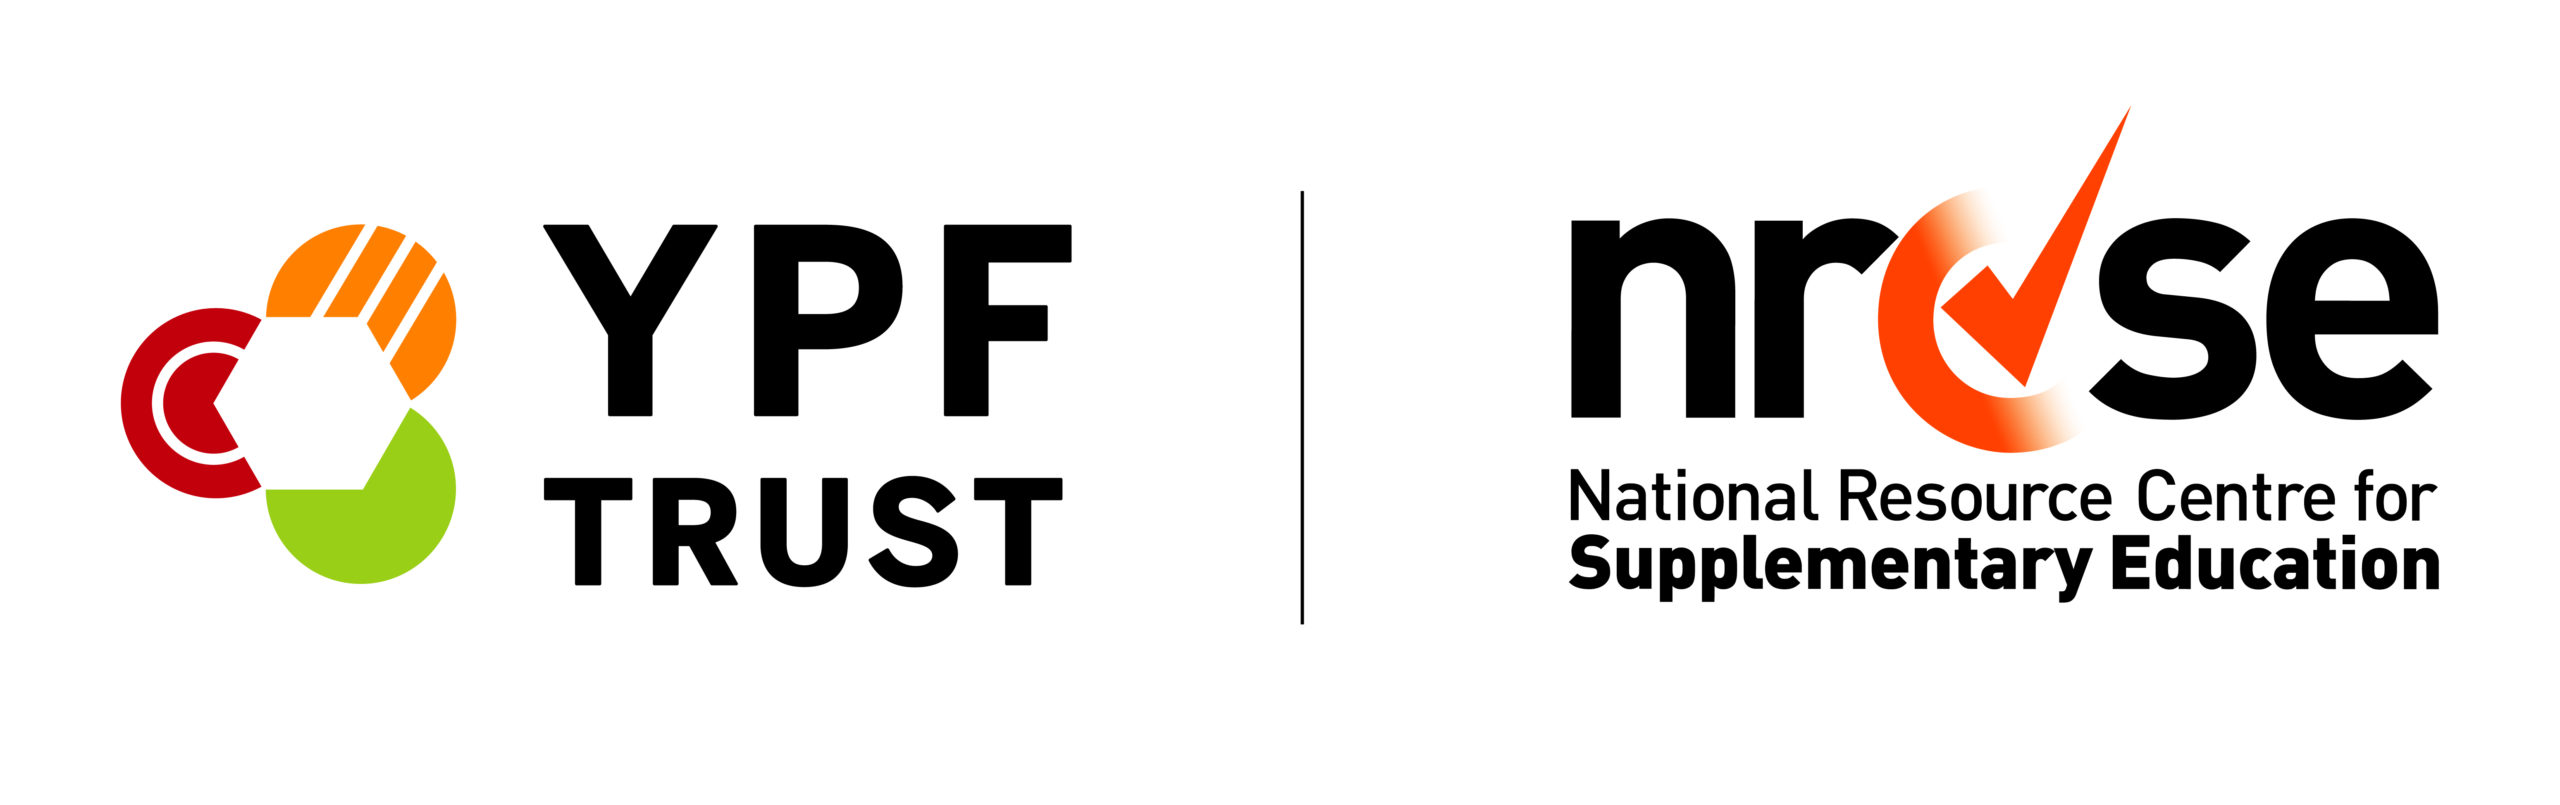 YPF Trust and NRSE National Resource Centre for supplementary Education Logo